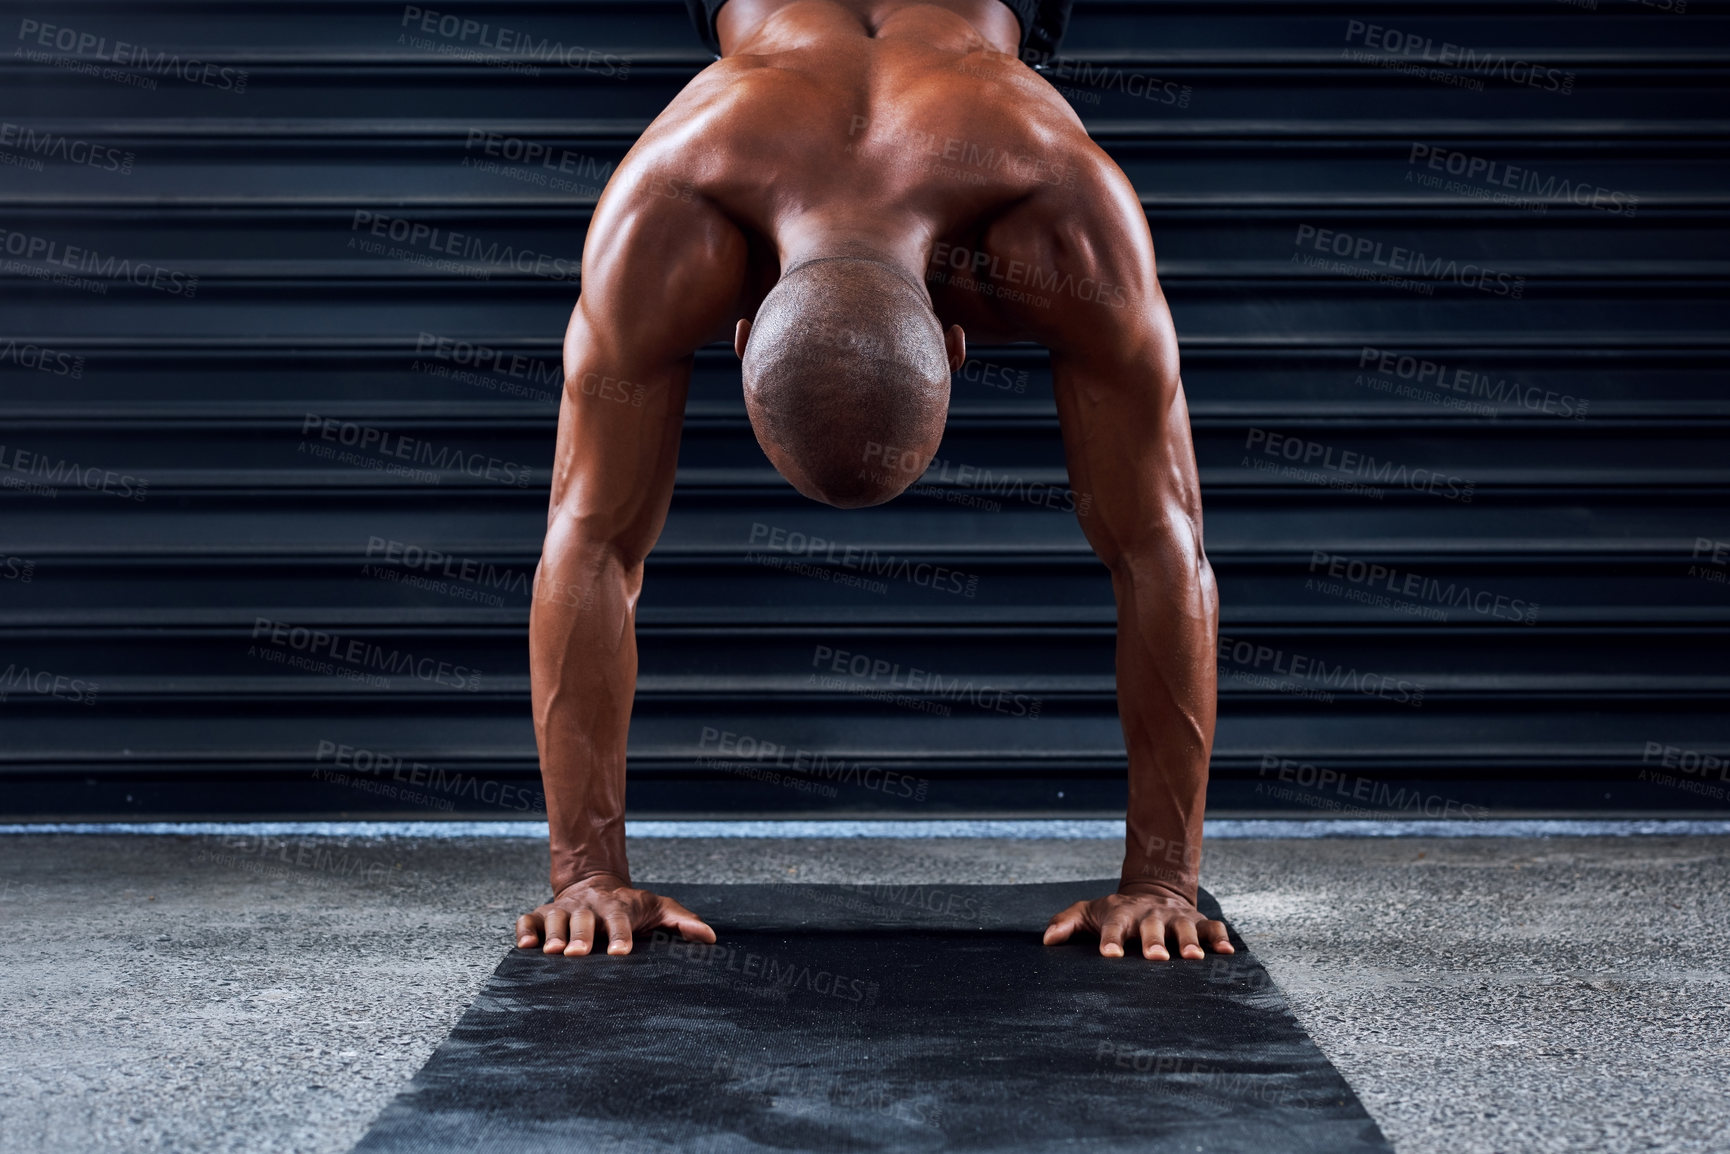 Buy stock photo Shot of a sporty young man doing a handstand